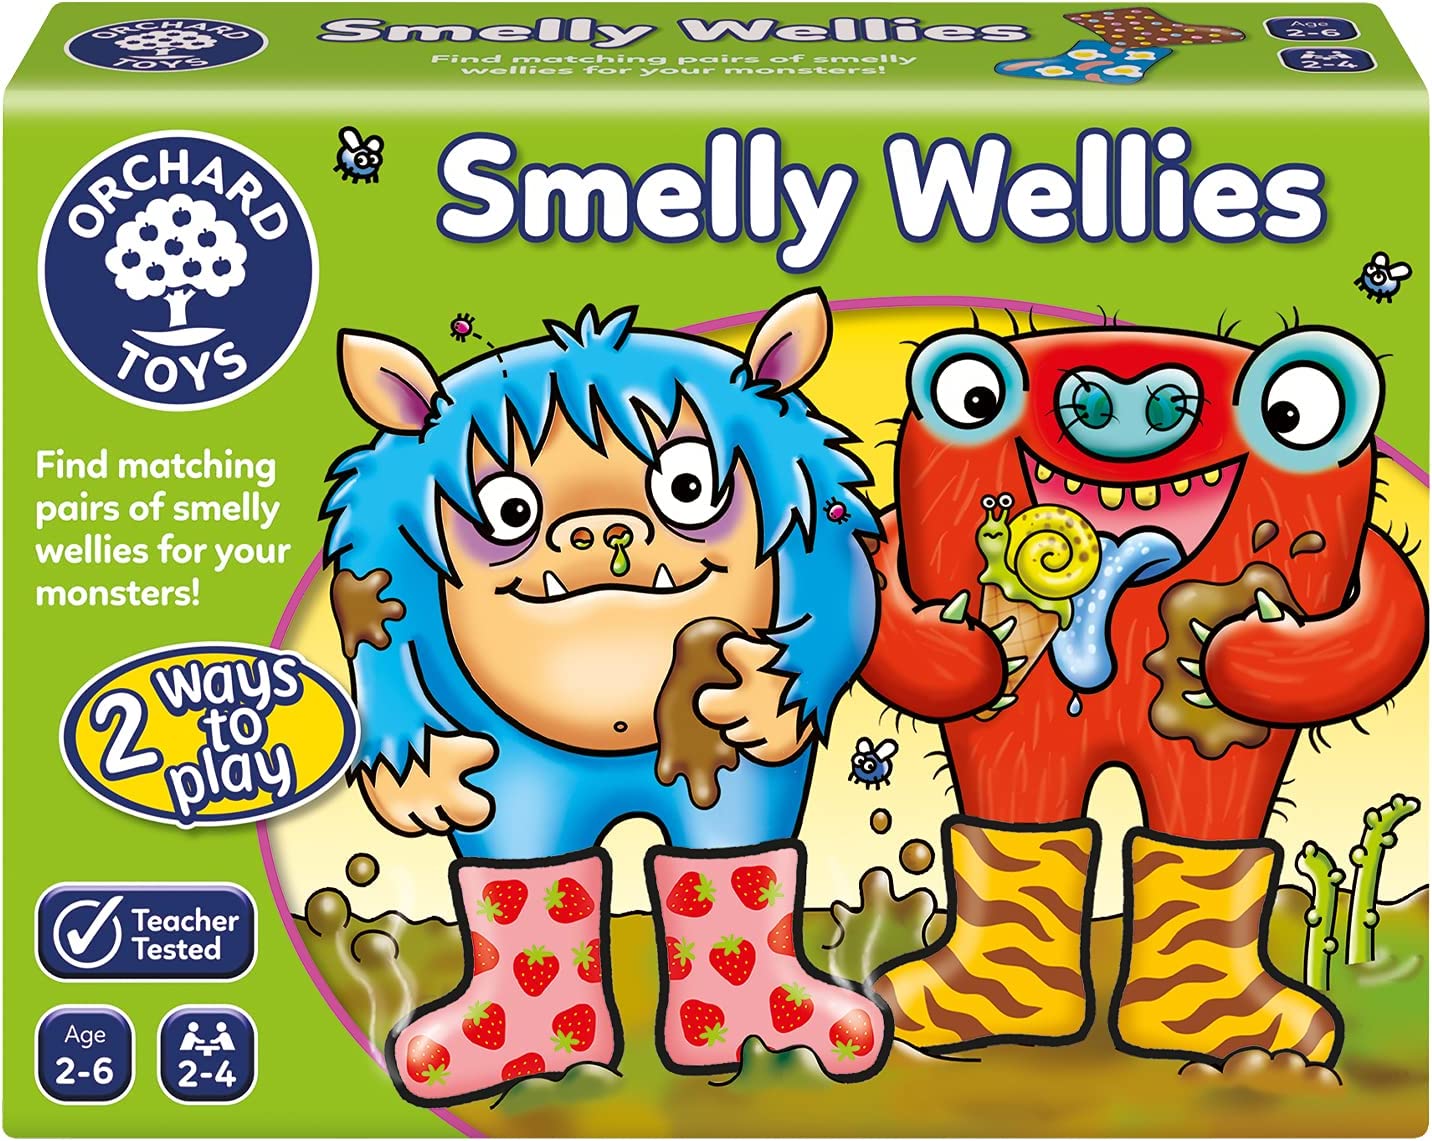 Orchard Toys Smelly Wellies Game, Educational Game for Children Aged 2-6, First Matching Game, Develops Matching & Memory Skills, Two Ways to Play - FoxMart™️ - 24 months - 6 years